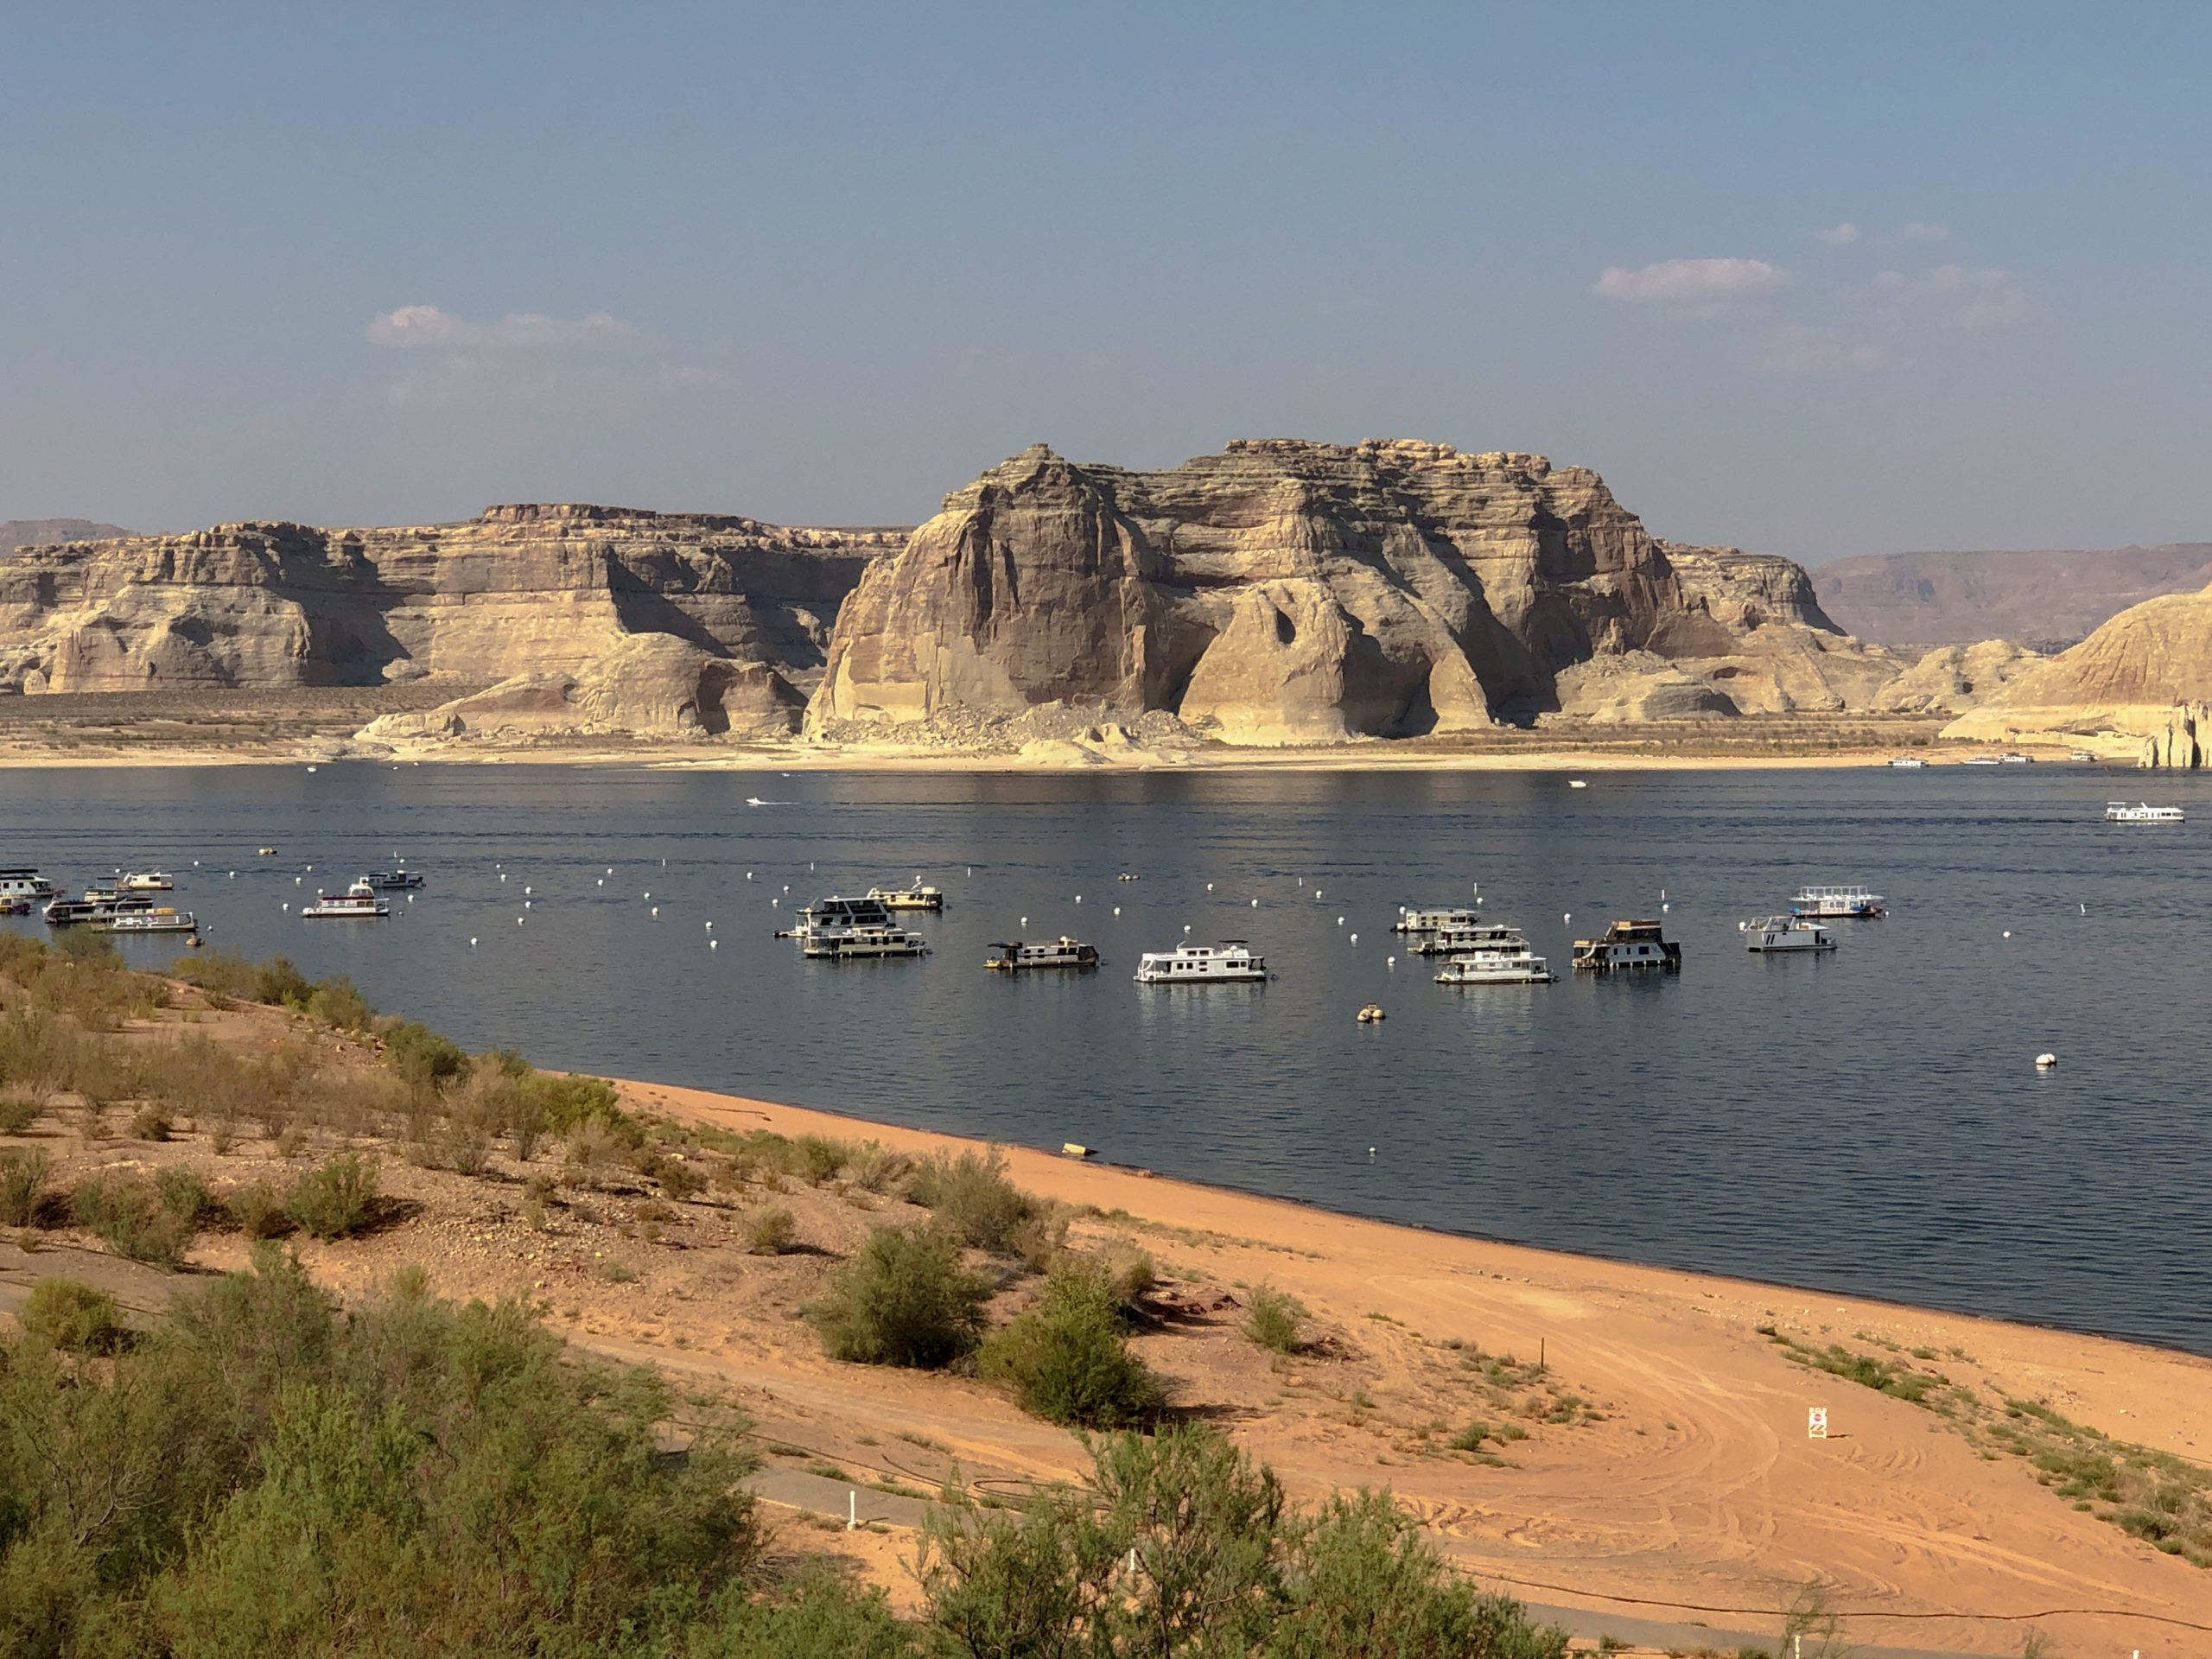 While Lake Powell is known for its recreation, its primary purpose is to store water for Colorado, New Mexico, Wyoming and Utah in wet years to meet their downstream water supply obligations in dry years under the 1922 Colorado River Compact. Photo credit: Denver Water.